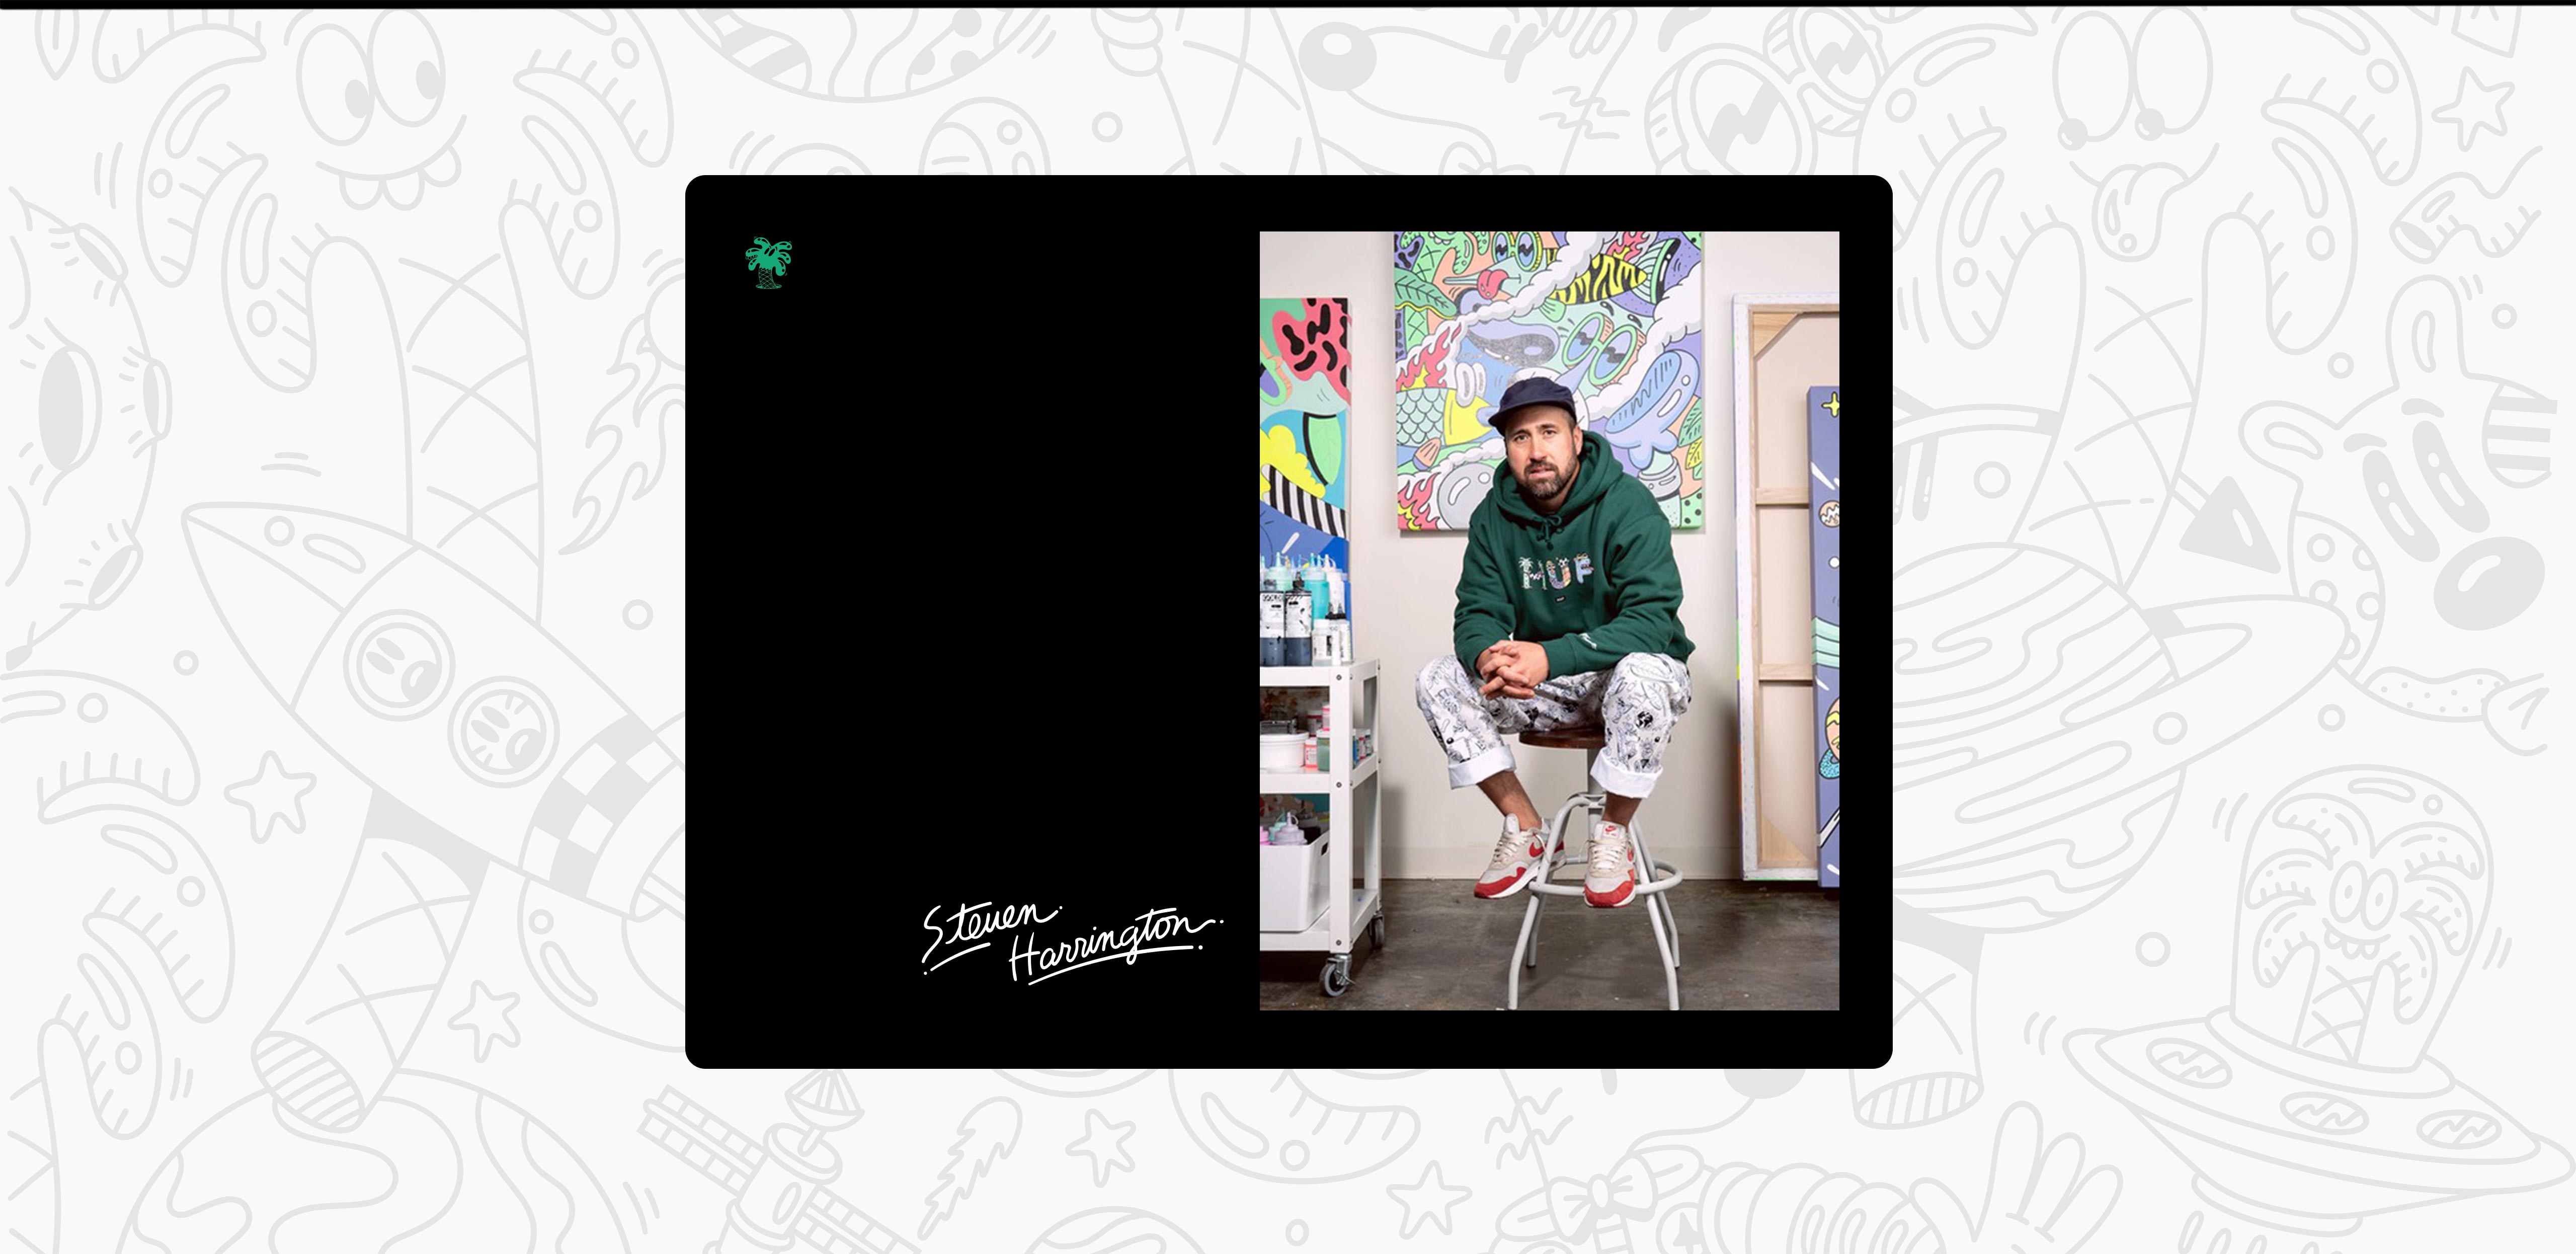 Steven Harrington pictured in a green hoodie. He is sitting on a stool in front of one of his artworks.